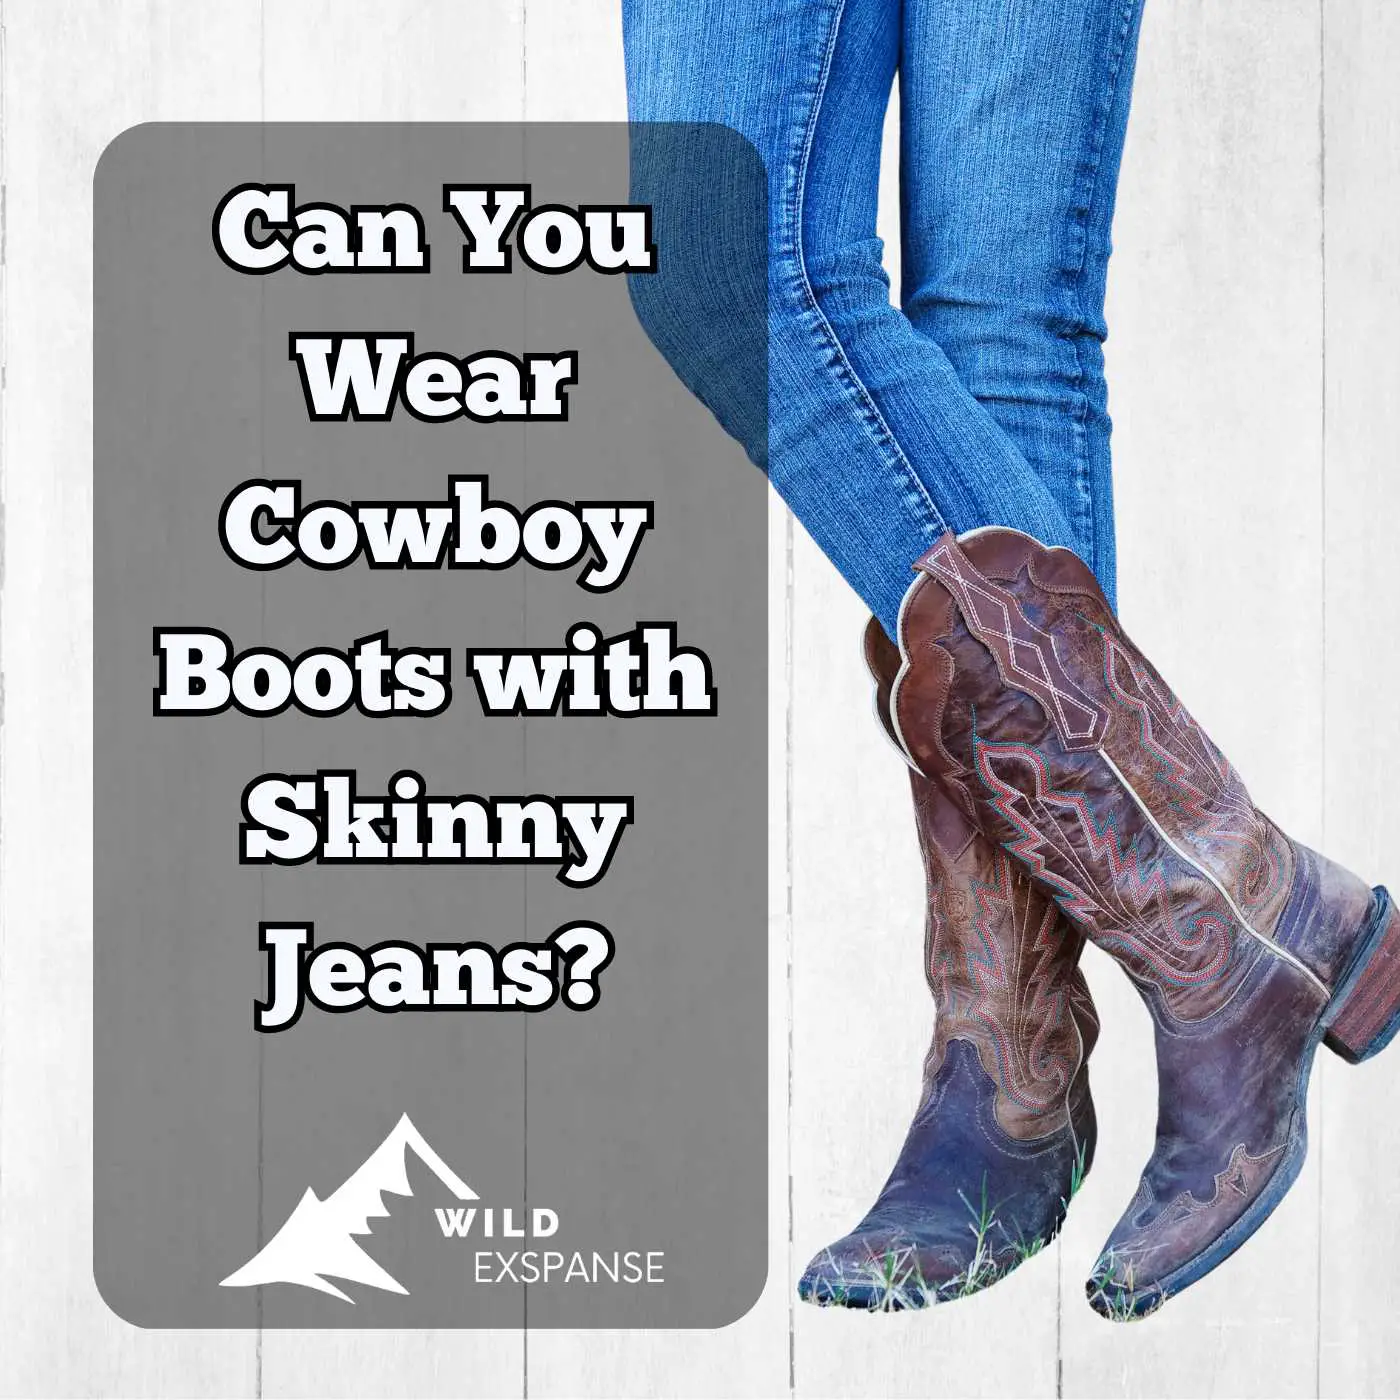 Can You Wear Cowboy Boots with Skinny Jeans? Women's Guide and